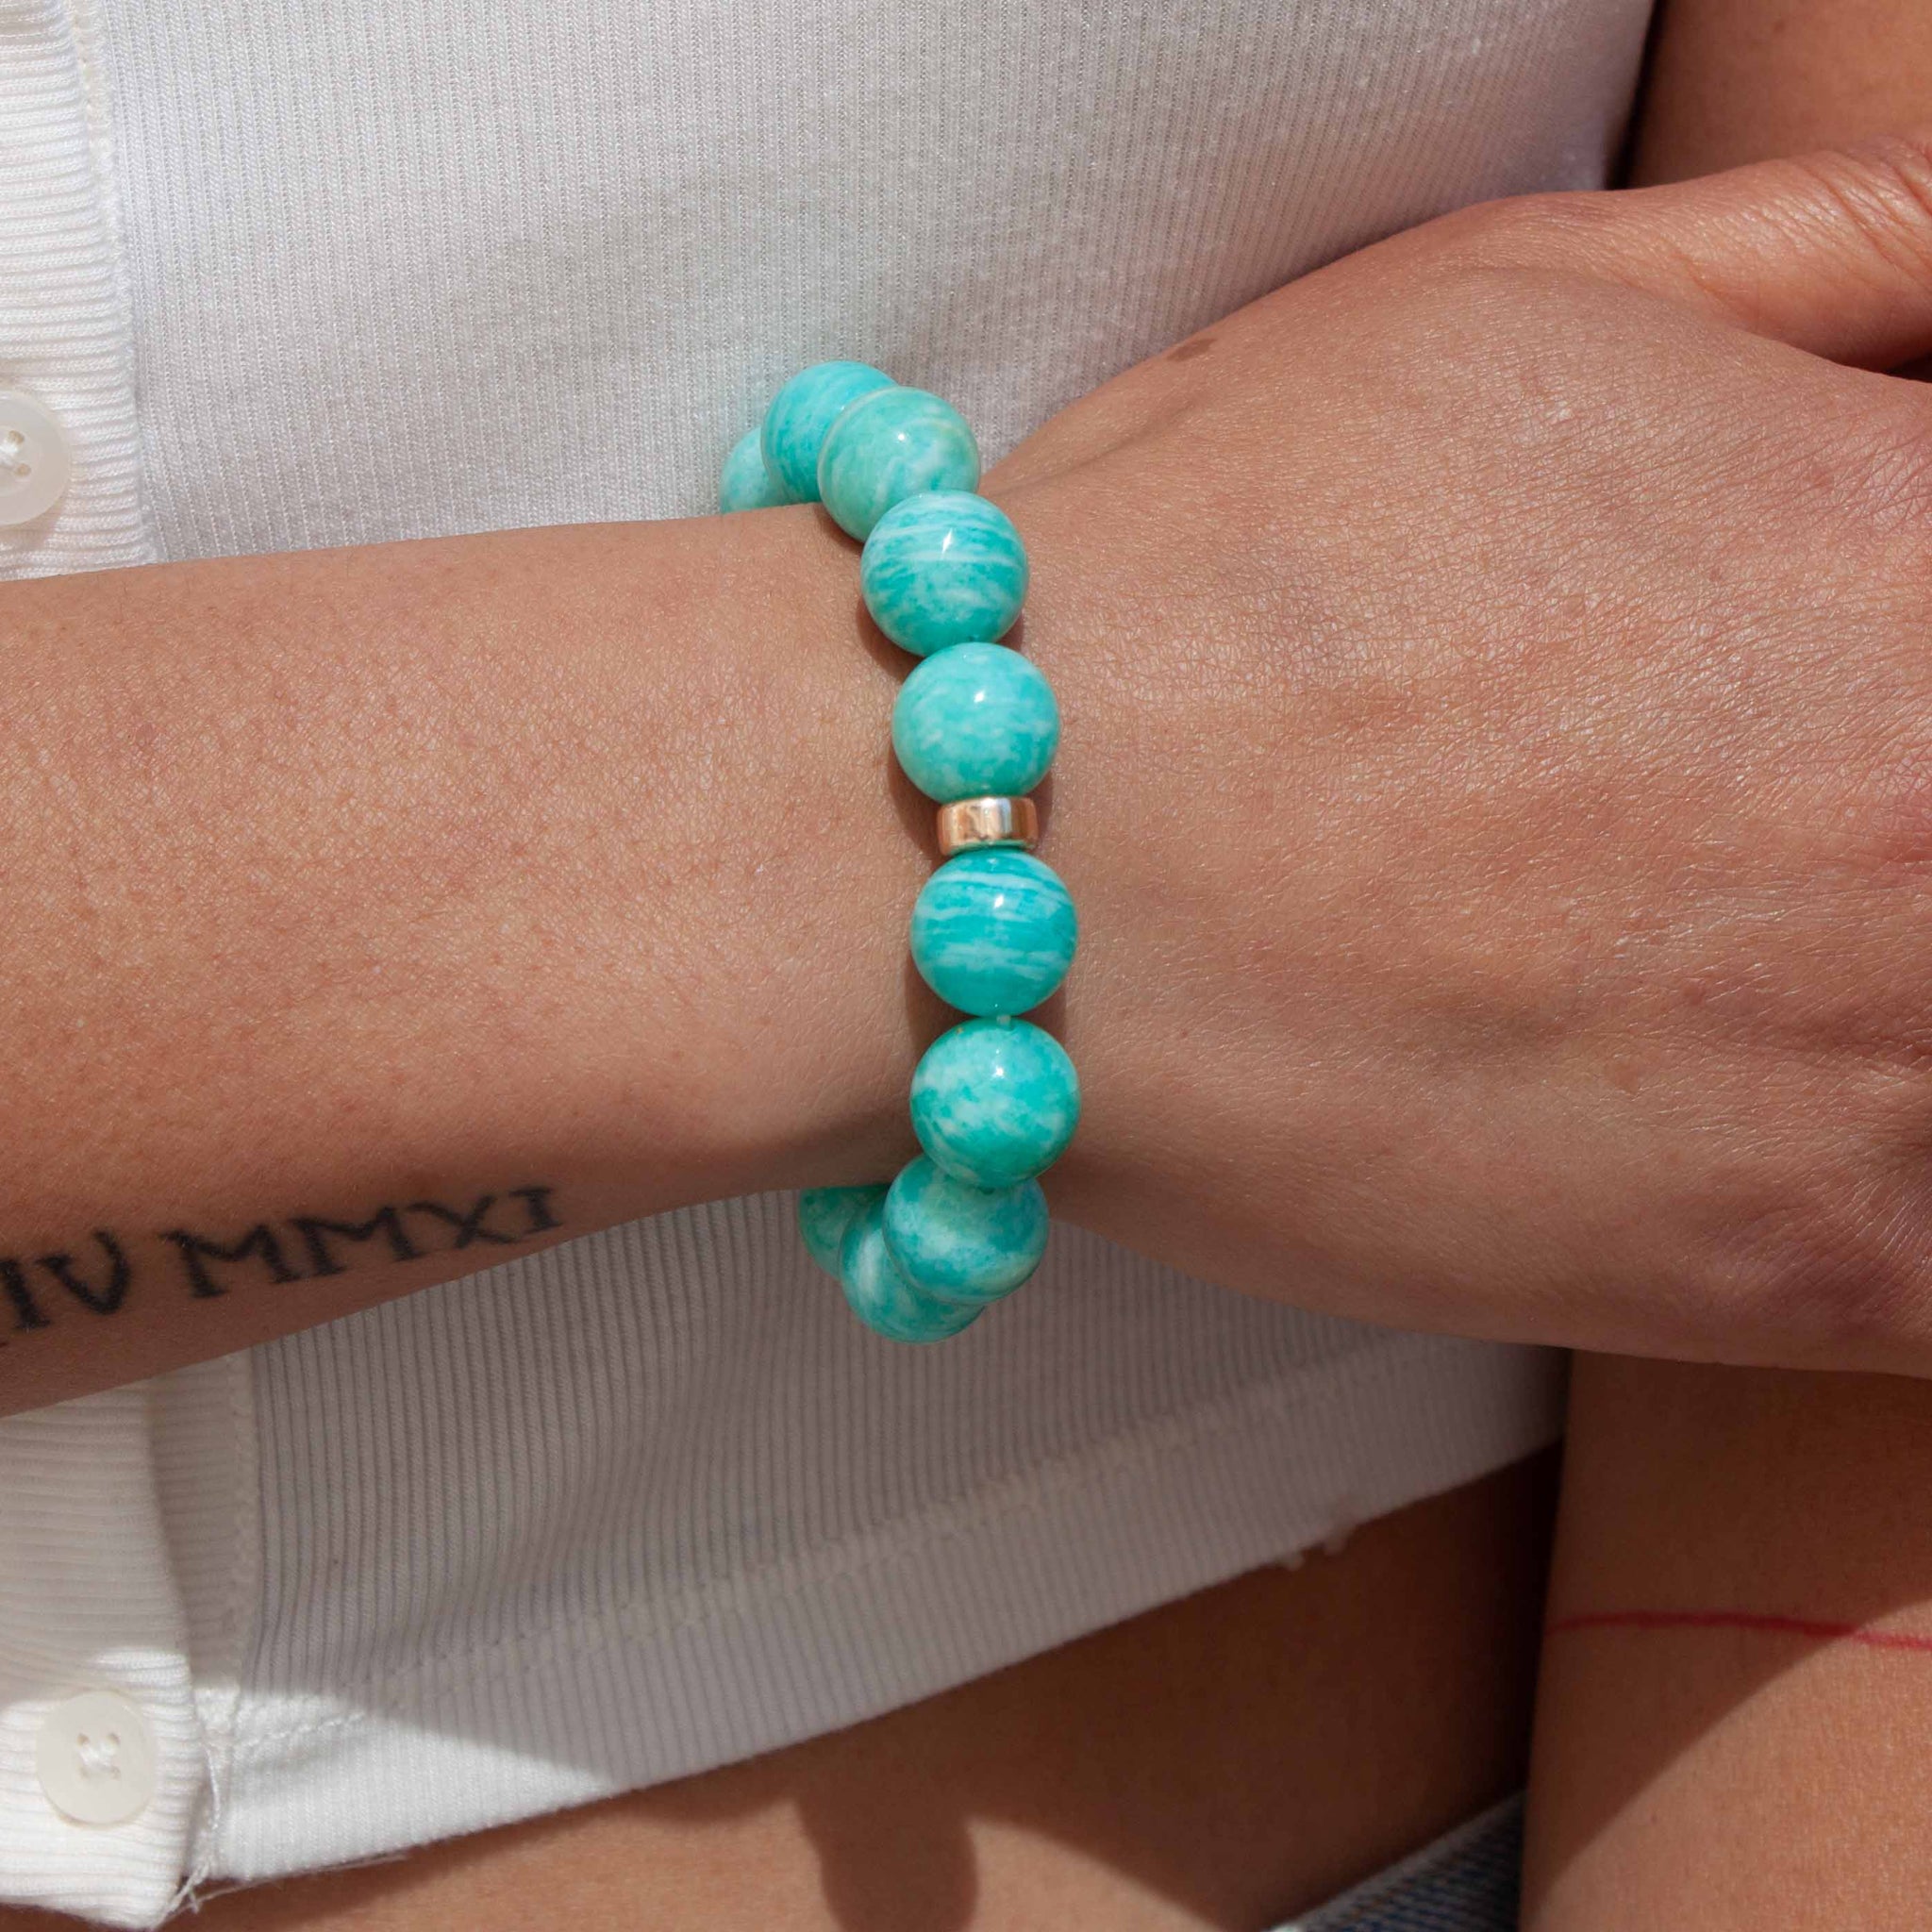 Our favourite colour combo - gold and turquoise! Treat yourself to some seriously beautiful and memorable arm candy this summer! 7" amazonite bracelet and 14kt gold filled beads double strung with silk elastic. Handmade in Toronto by kp jewelry co. 